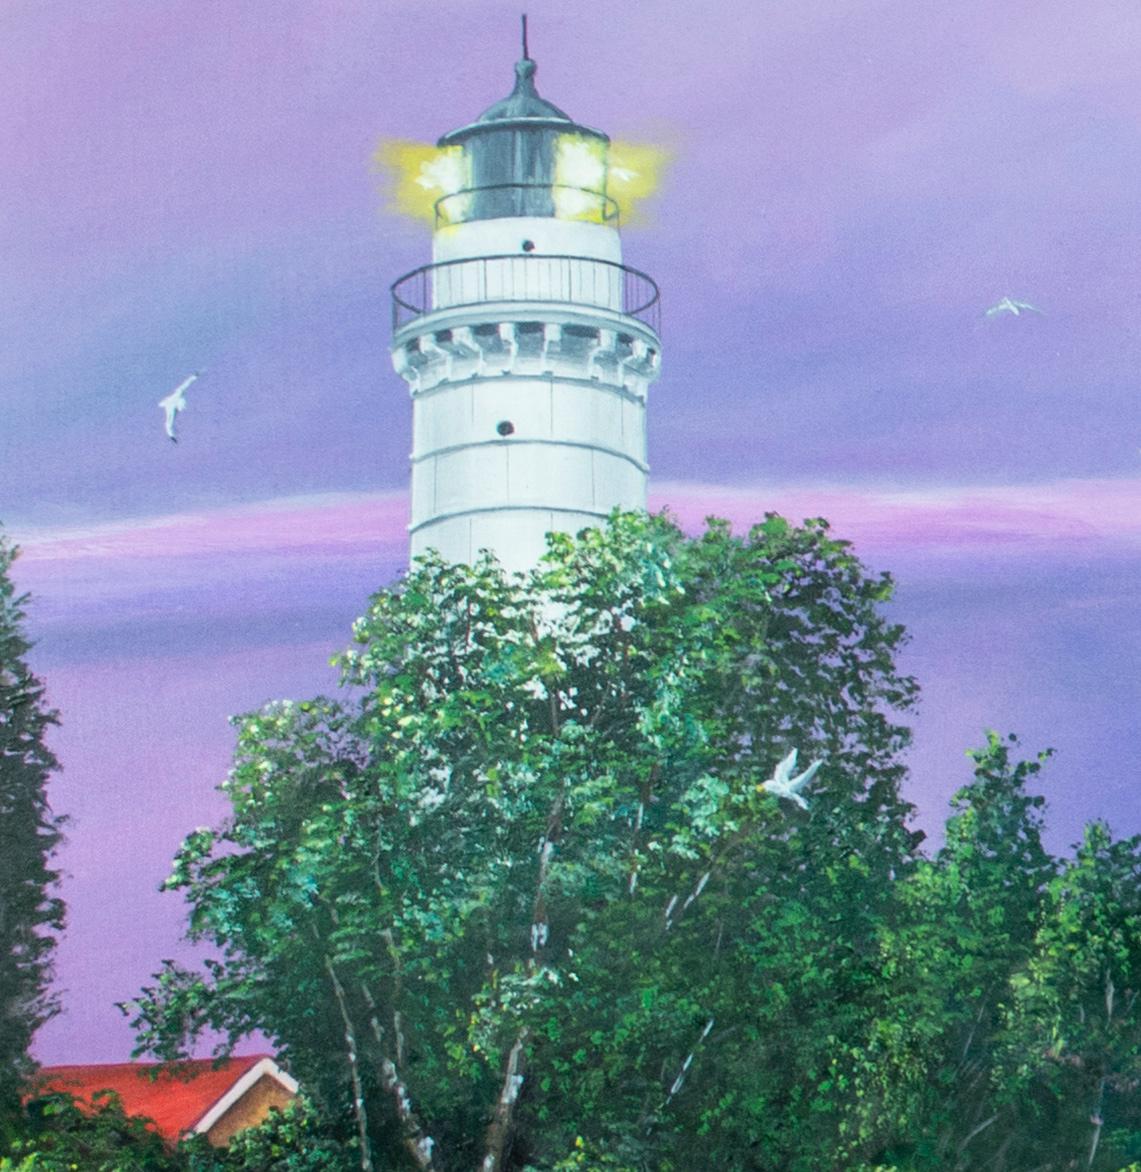 'Cana Island Lighthouse' is an original landscape painting signed by American artist Gregory Steele. In the painting, Steele presents a picturesque view of the Door County, Wisconsin lighthouse on Cana Island – near Spikehorn Bay and Moonlight Bay.